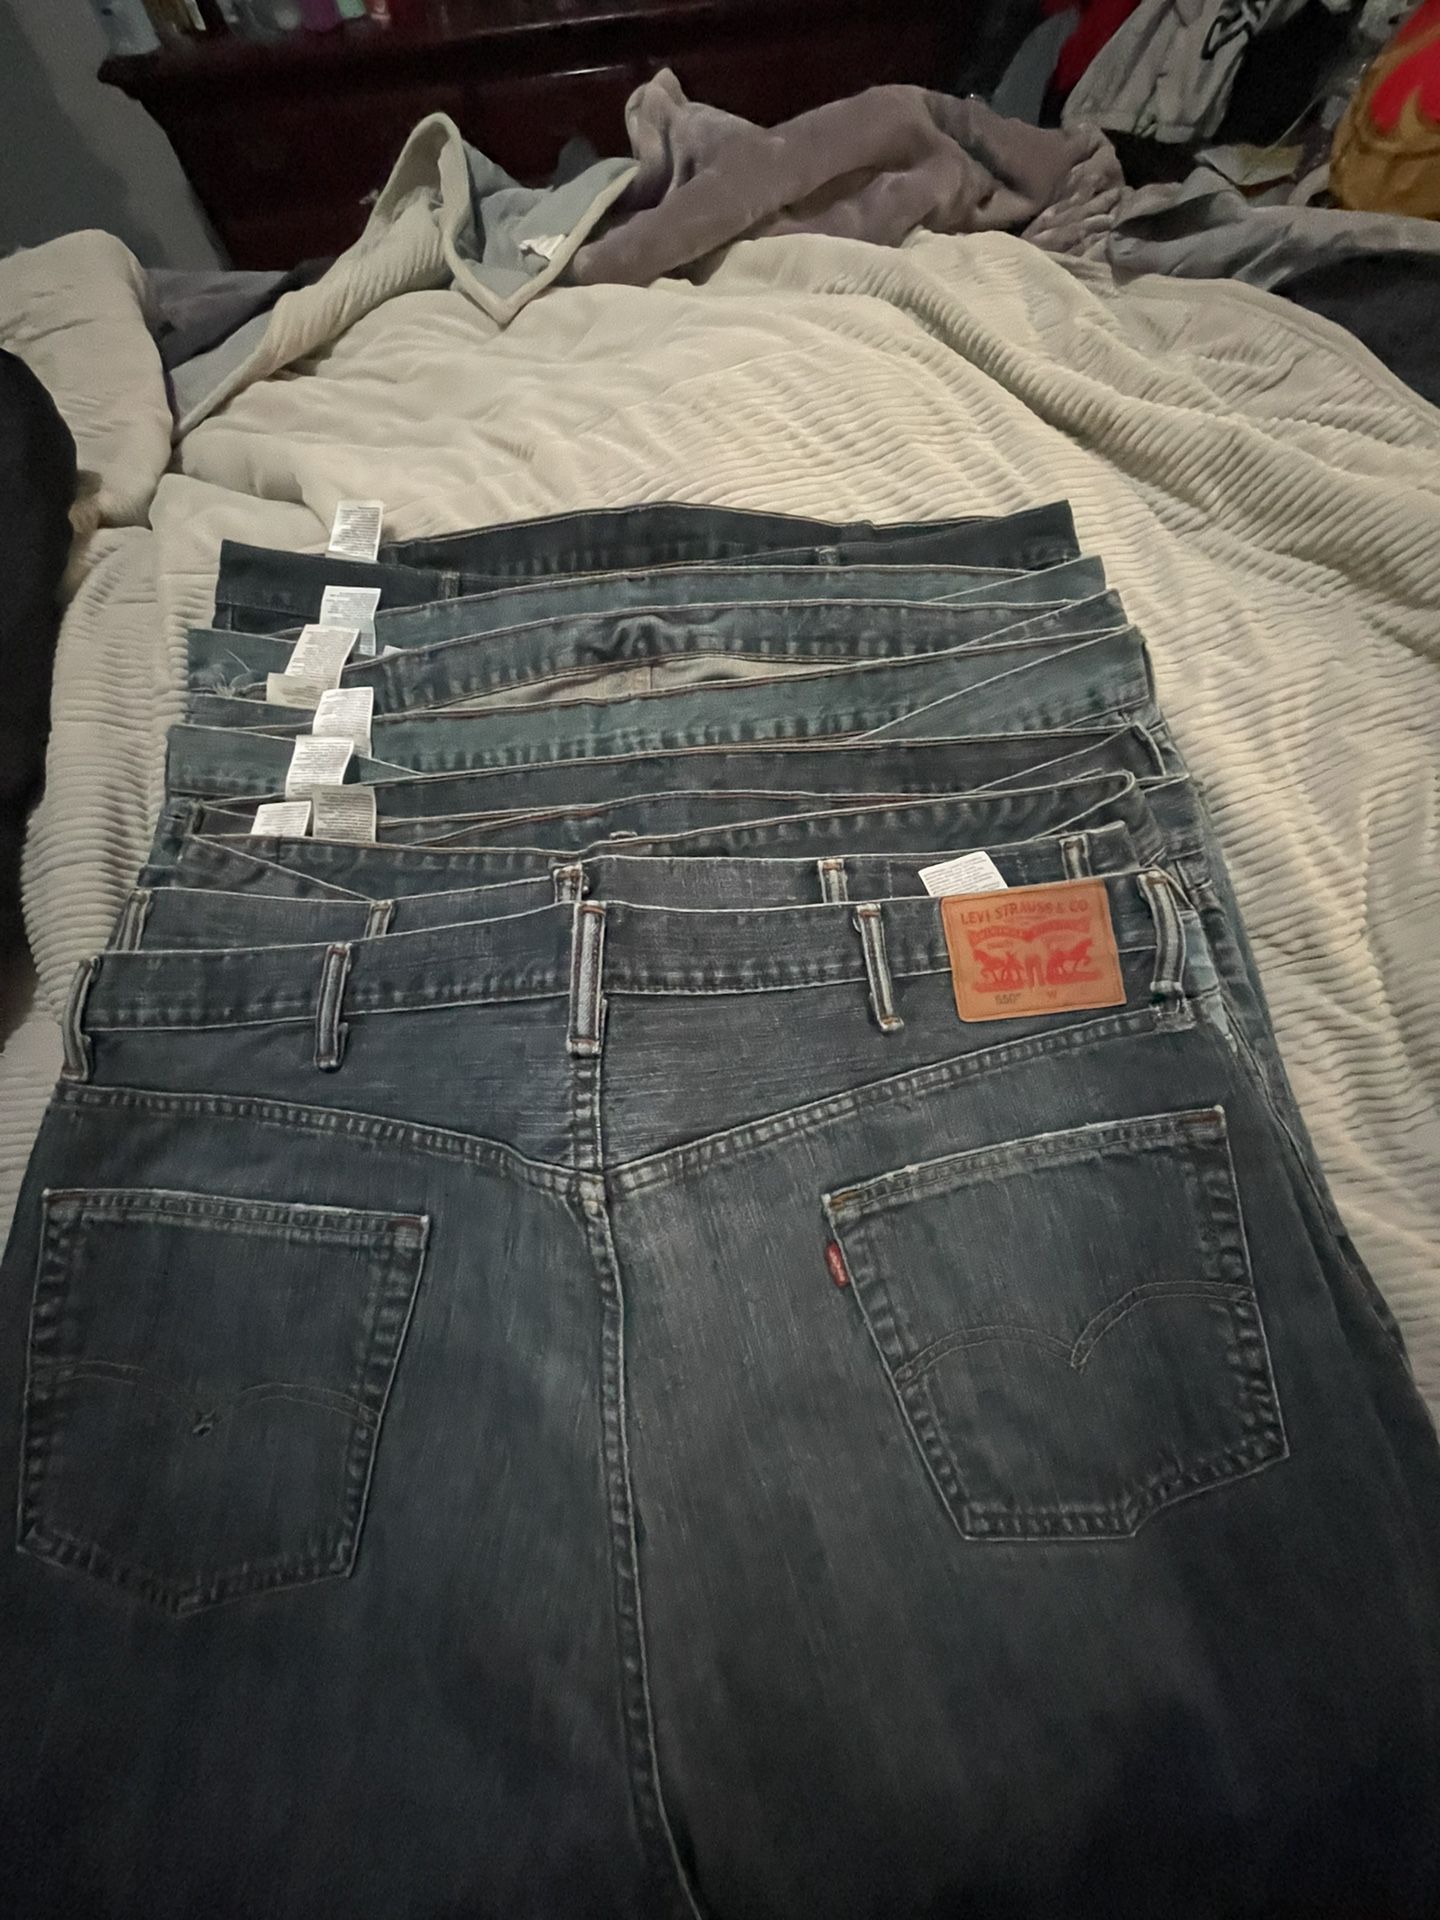 10 Pairs Of Levi’s Jeans Size 46 GREAT CONDITION 